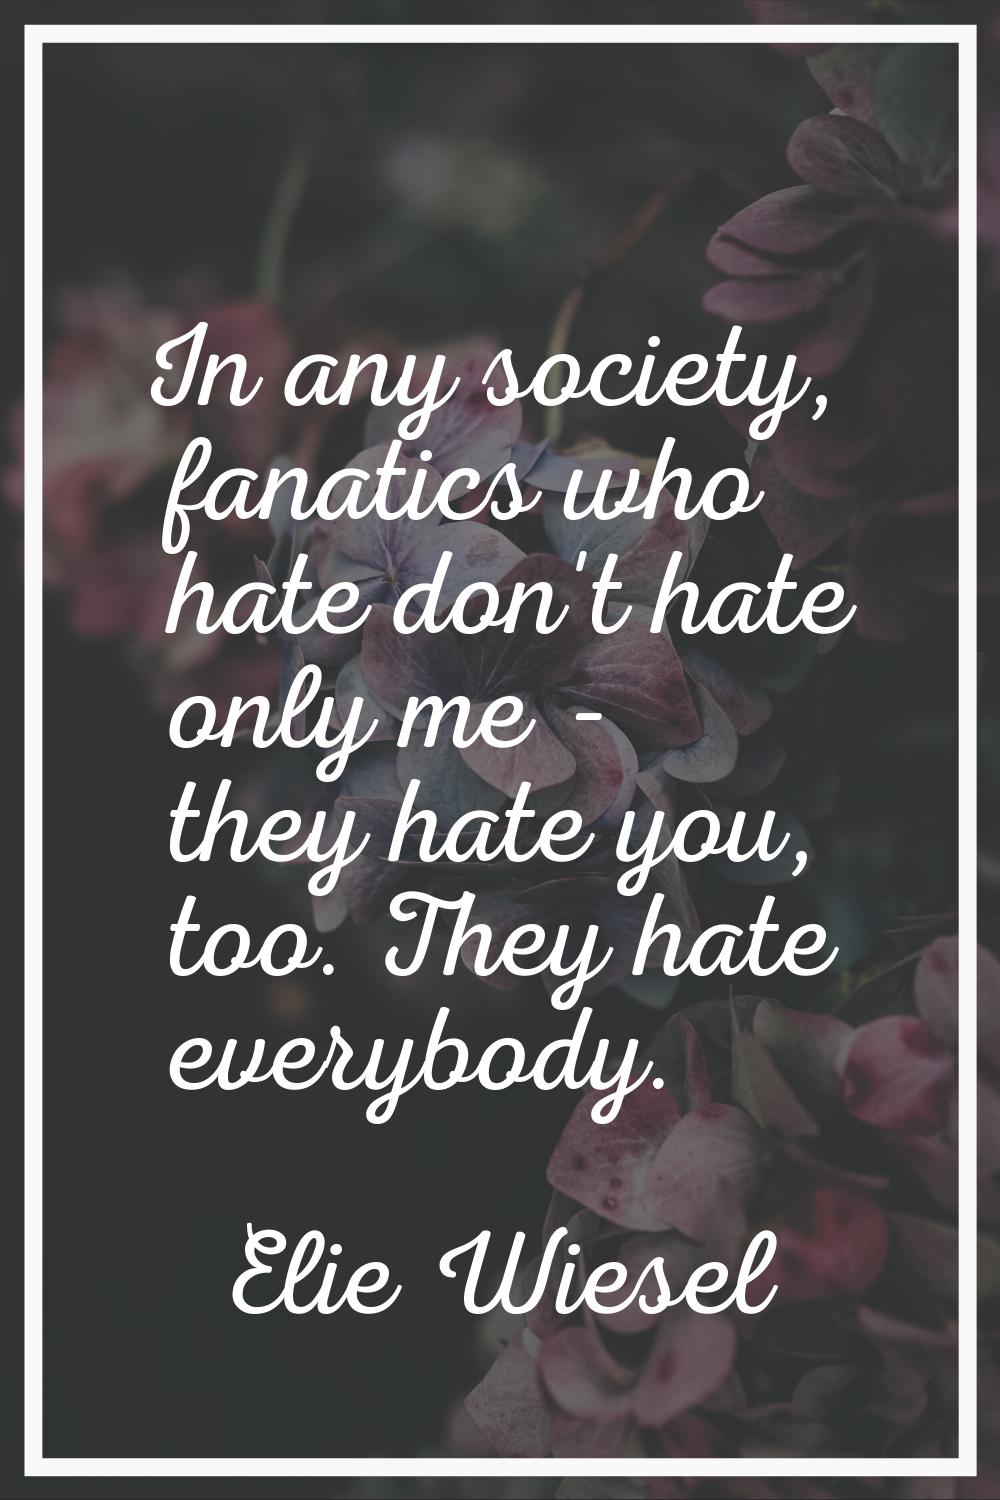 In any society, fanatics who hate don't hate only me - they hate you, too. They hate everybody.